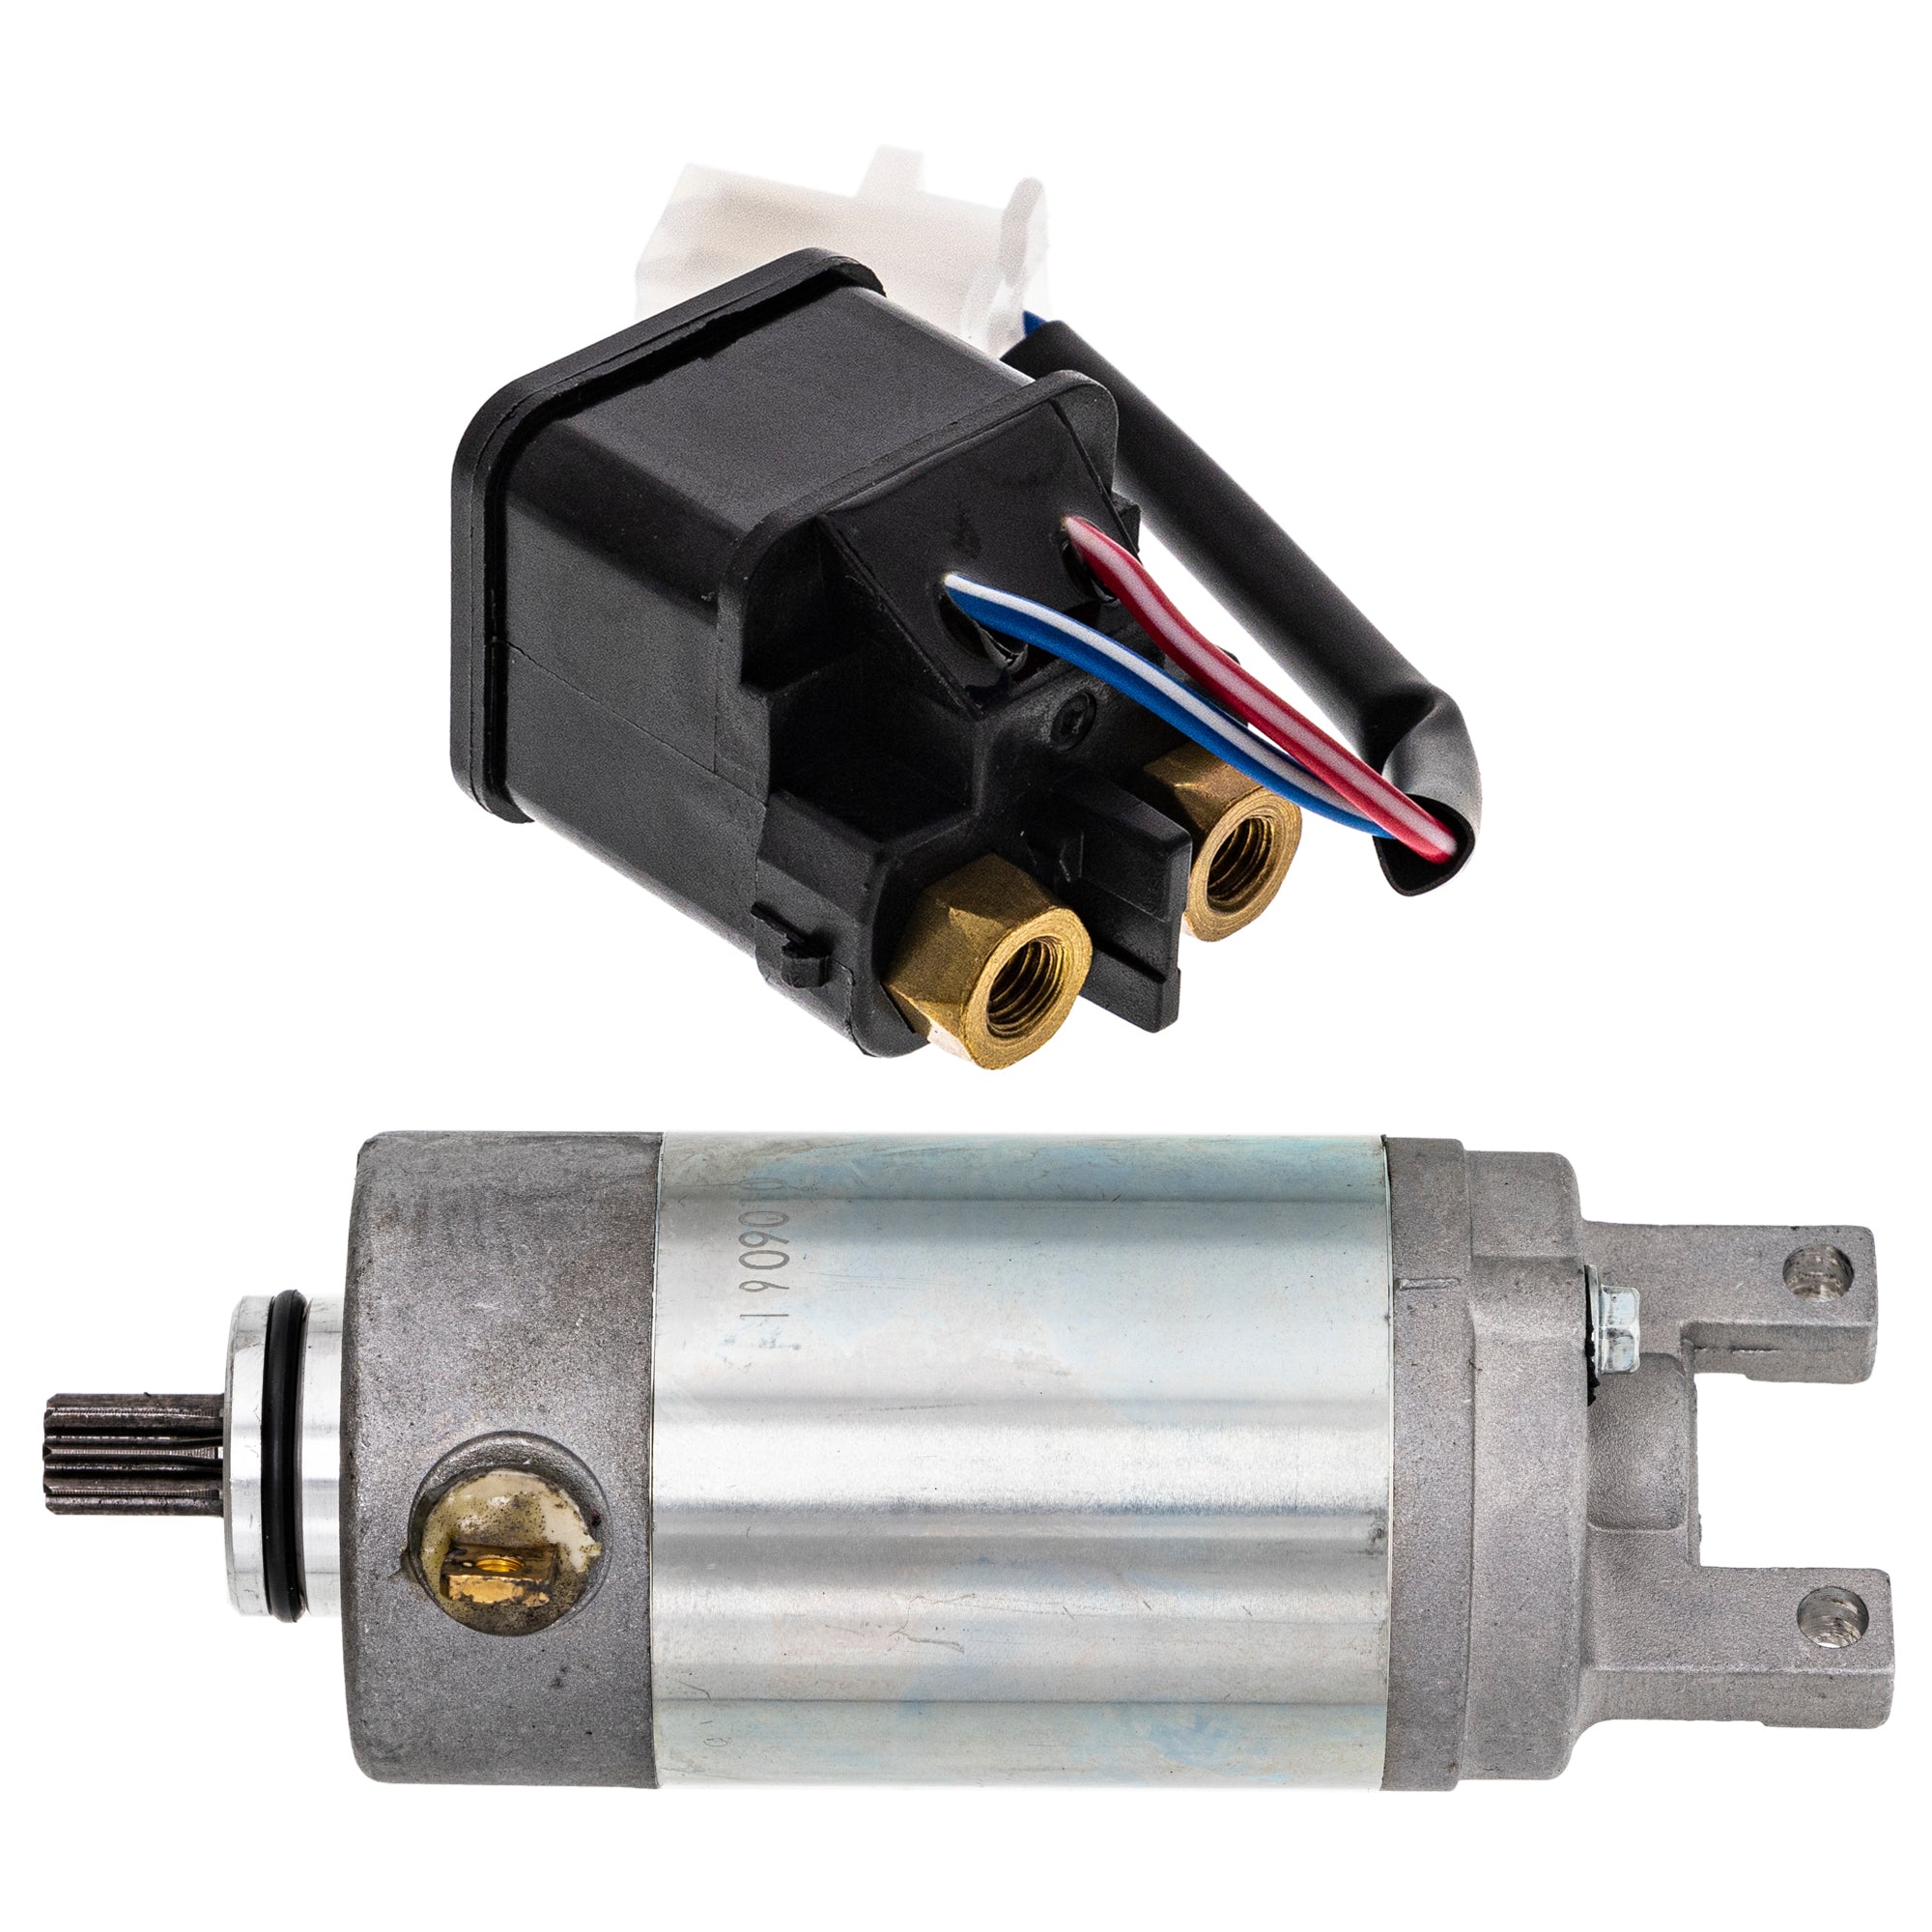 Starter Motor & Solenoid Kit for zOTHER Yamaha Grizzly Breeze 3FA-81800-01-00 NICHE MK1007579